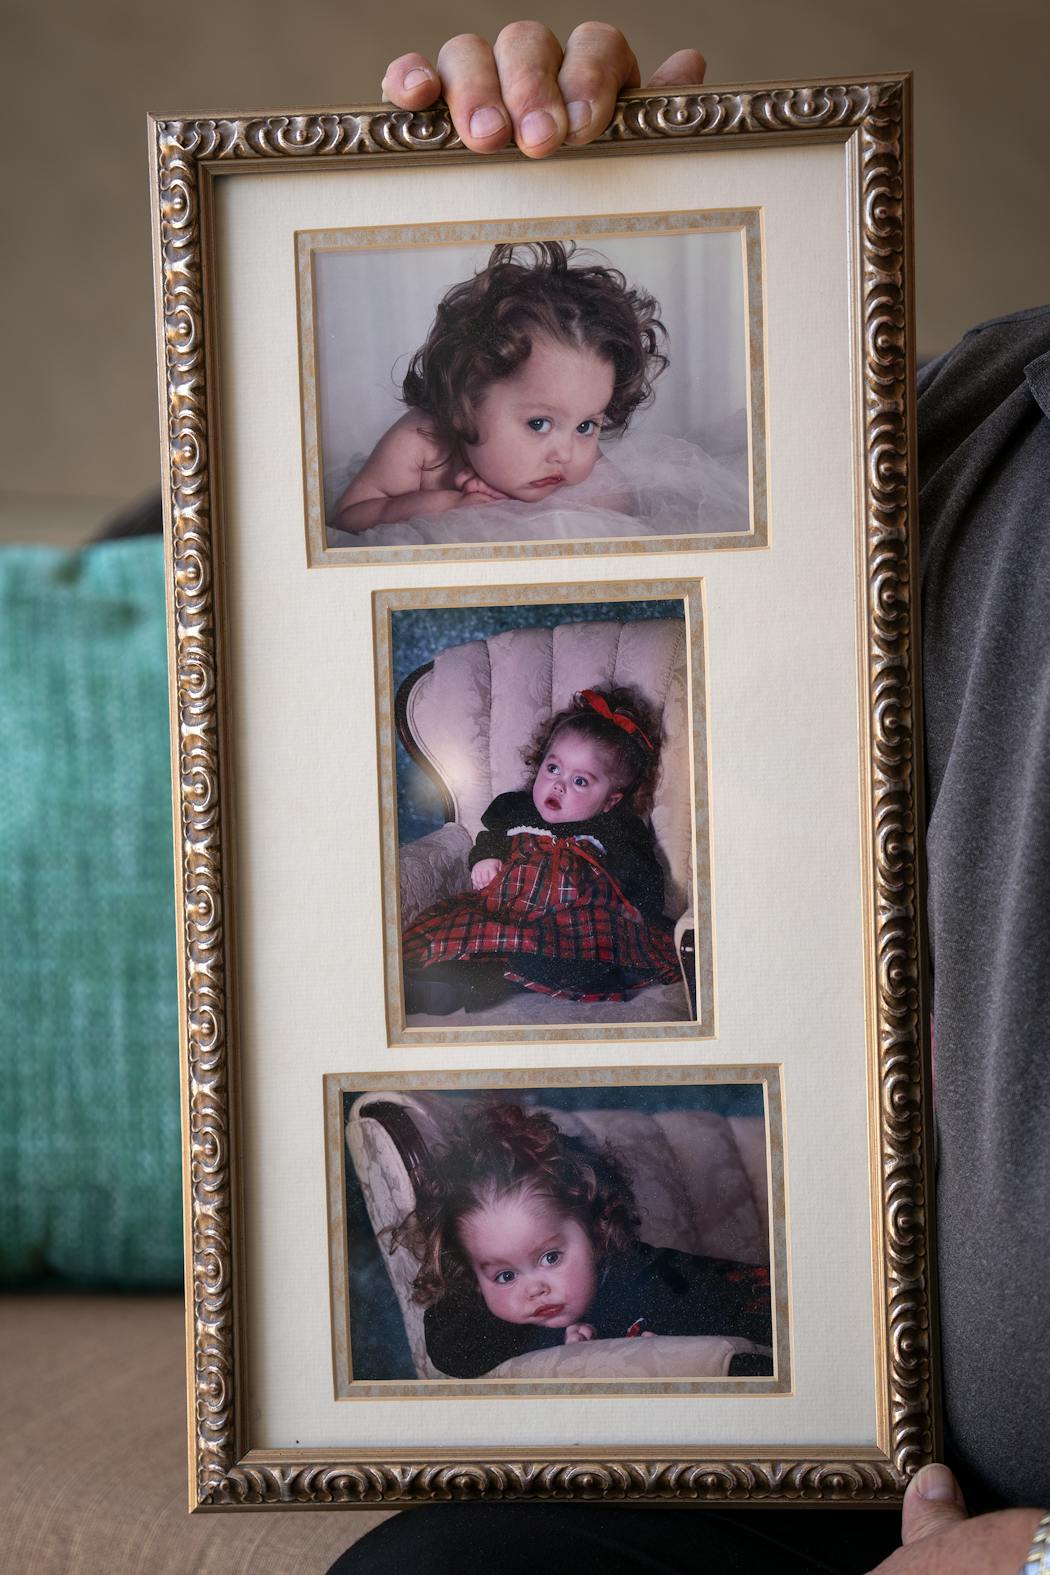 Paul Rosenau holds a frame with pictures of his granddaughter Mikayla.